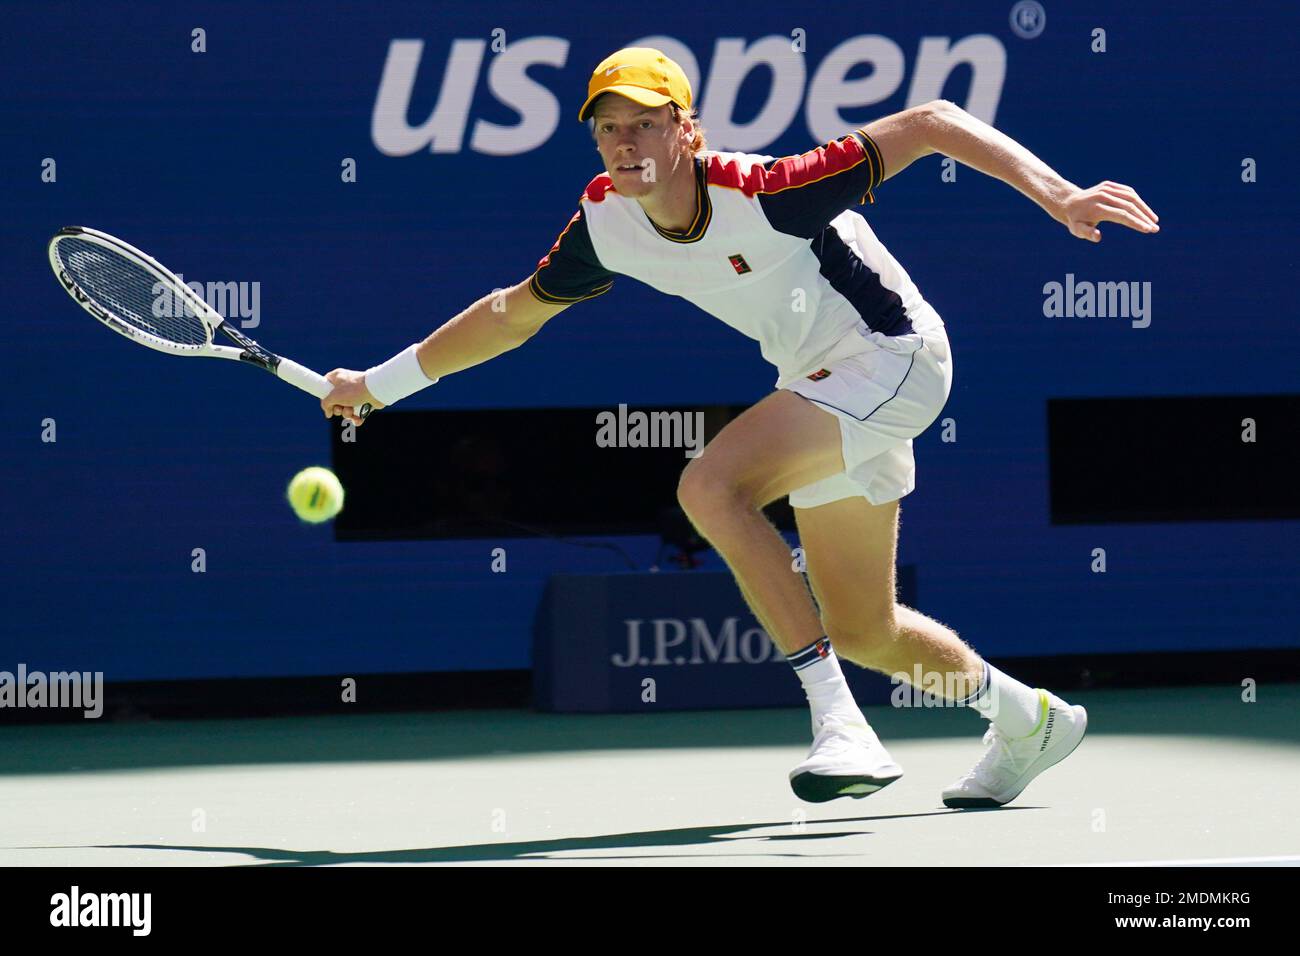 Jannik Sinner, of Italy, returns a shot against Alexander Zverev, of Germany, during the fourth round of the US Open tennis championships, Monday, Sept